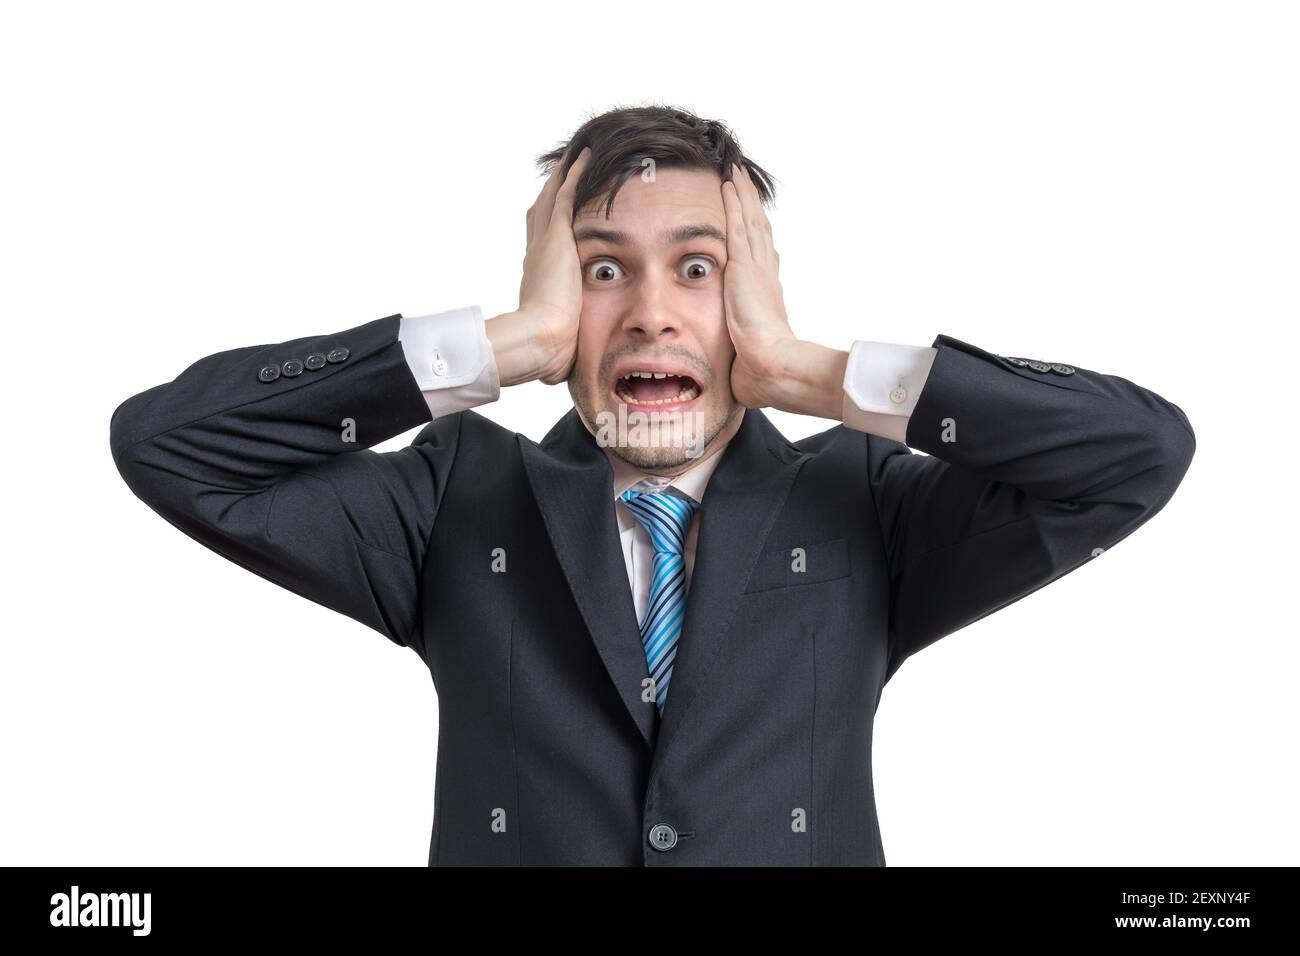 Stressed funny young businessman is holding his head. Isolated on white background. Stock Photo